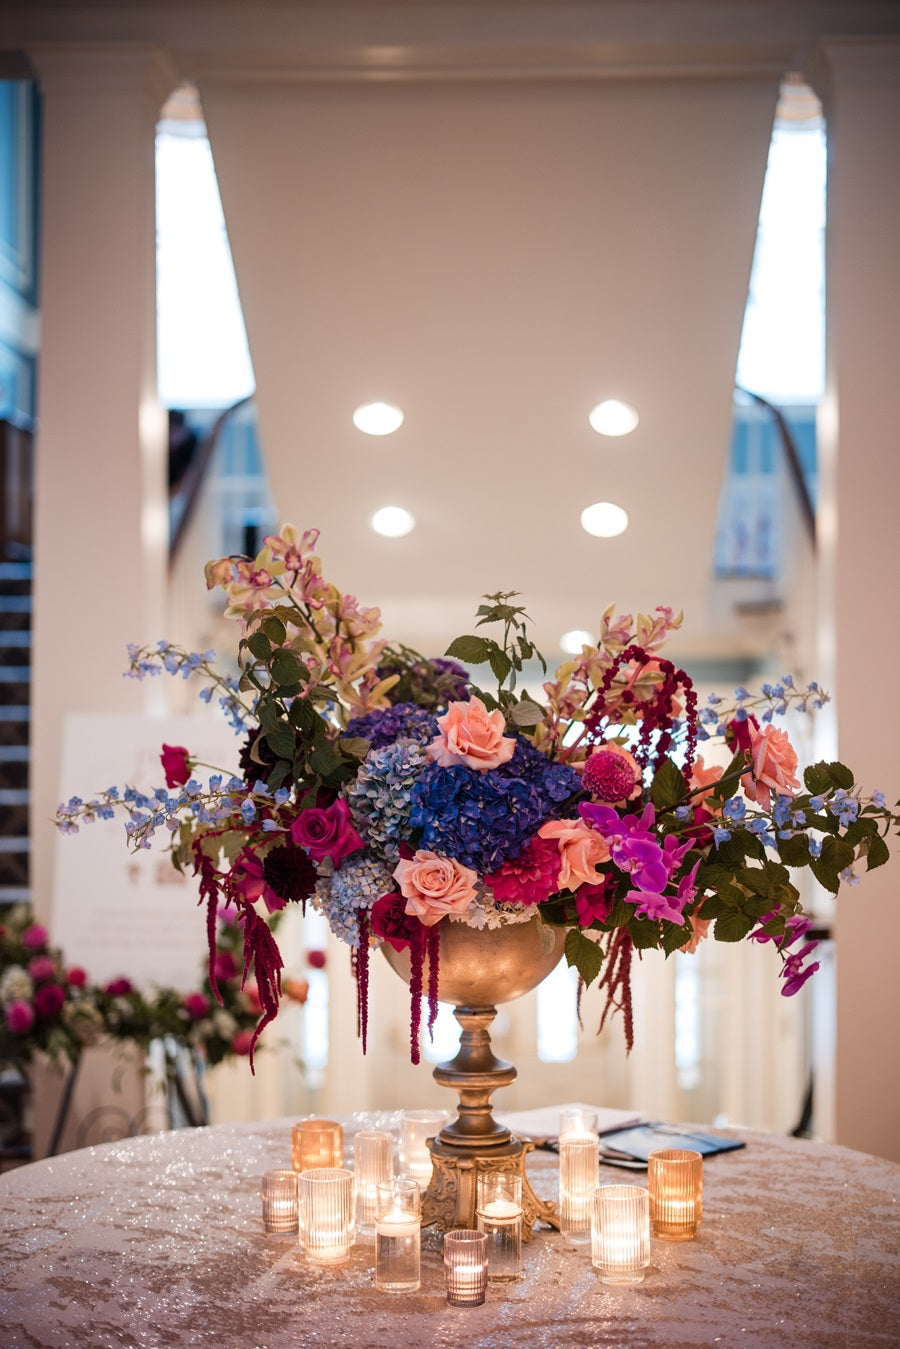 A large floral arrangement at the entrance to the reception. Florals are pink, purple, peach, blue, and green. Some florals pictured are roses, hydrangea, orchids, and delphinium.